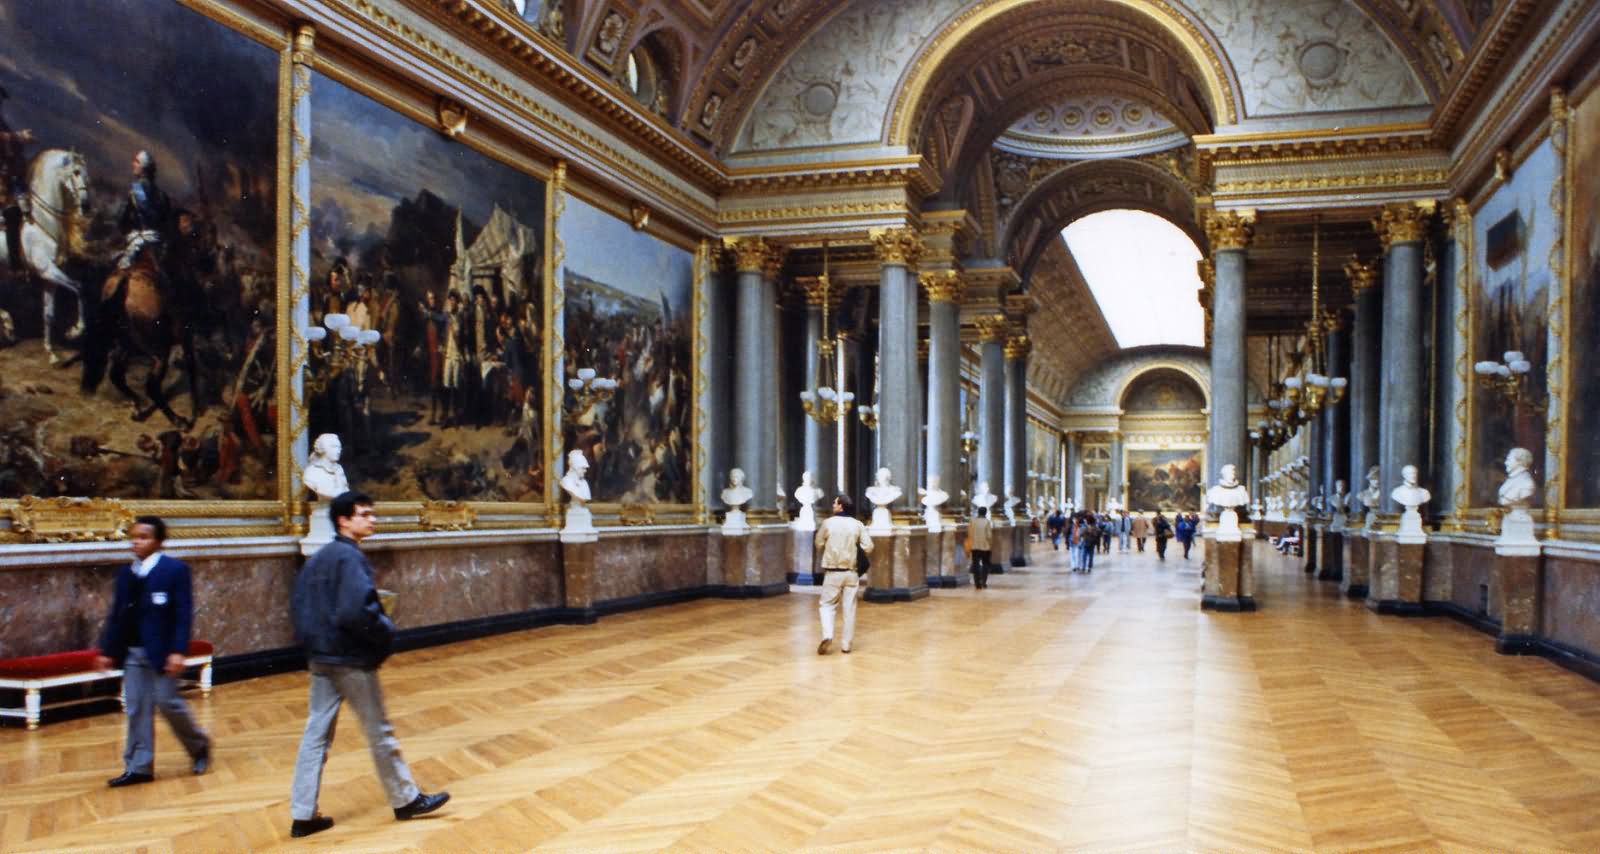 The Louvre Inside Image